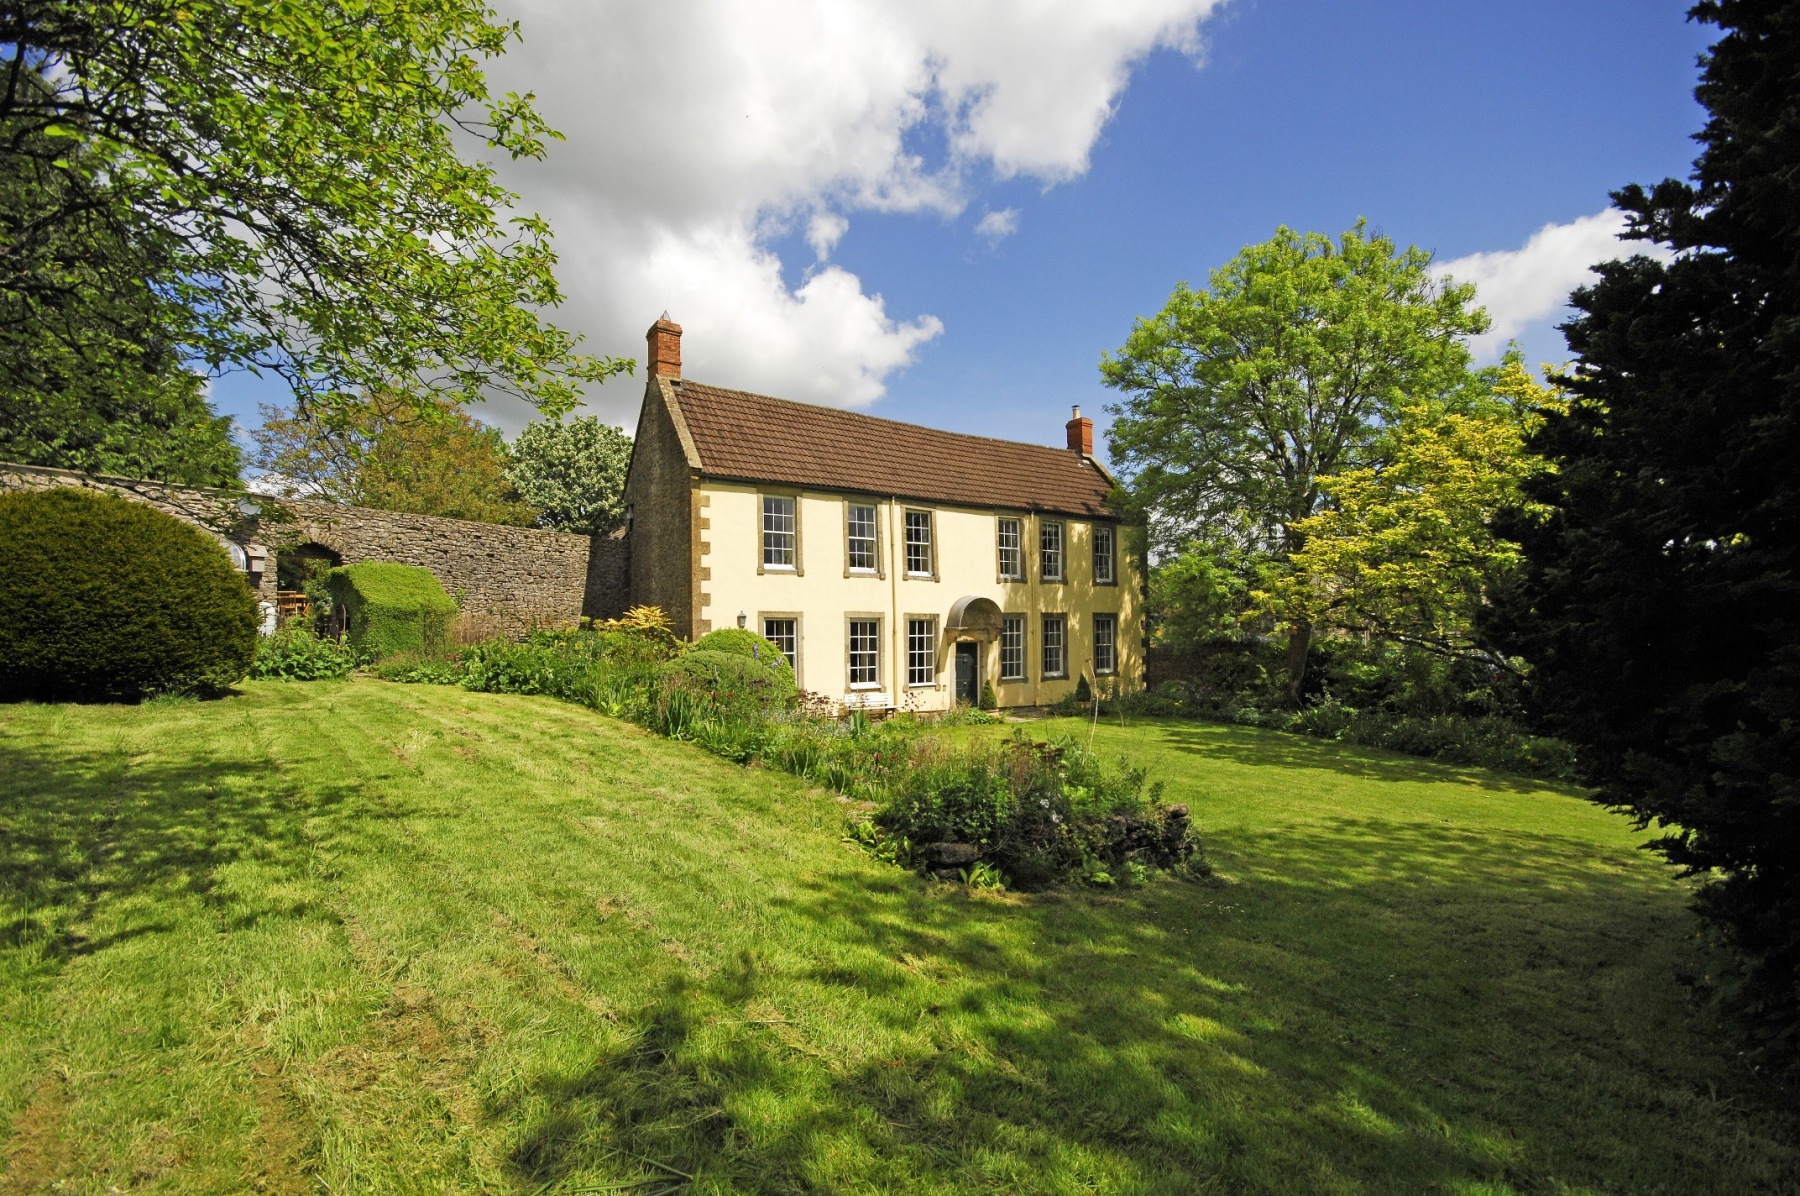 Topside House - gorgeous period house in grounds